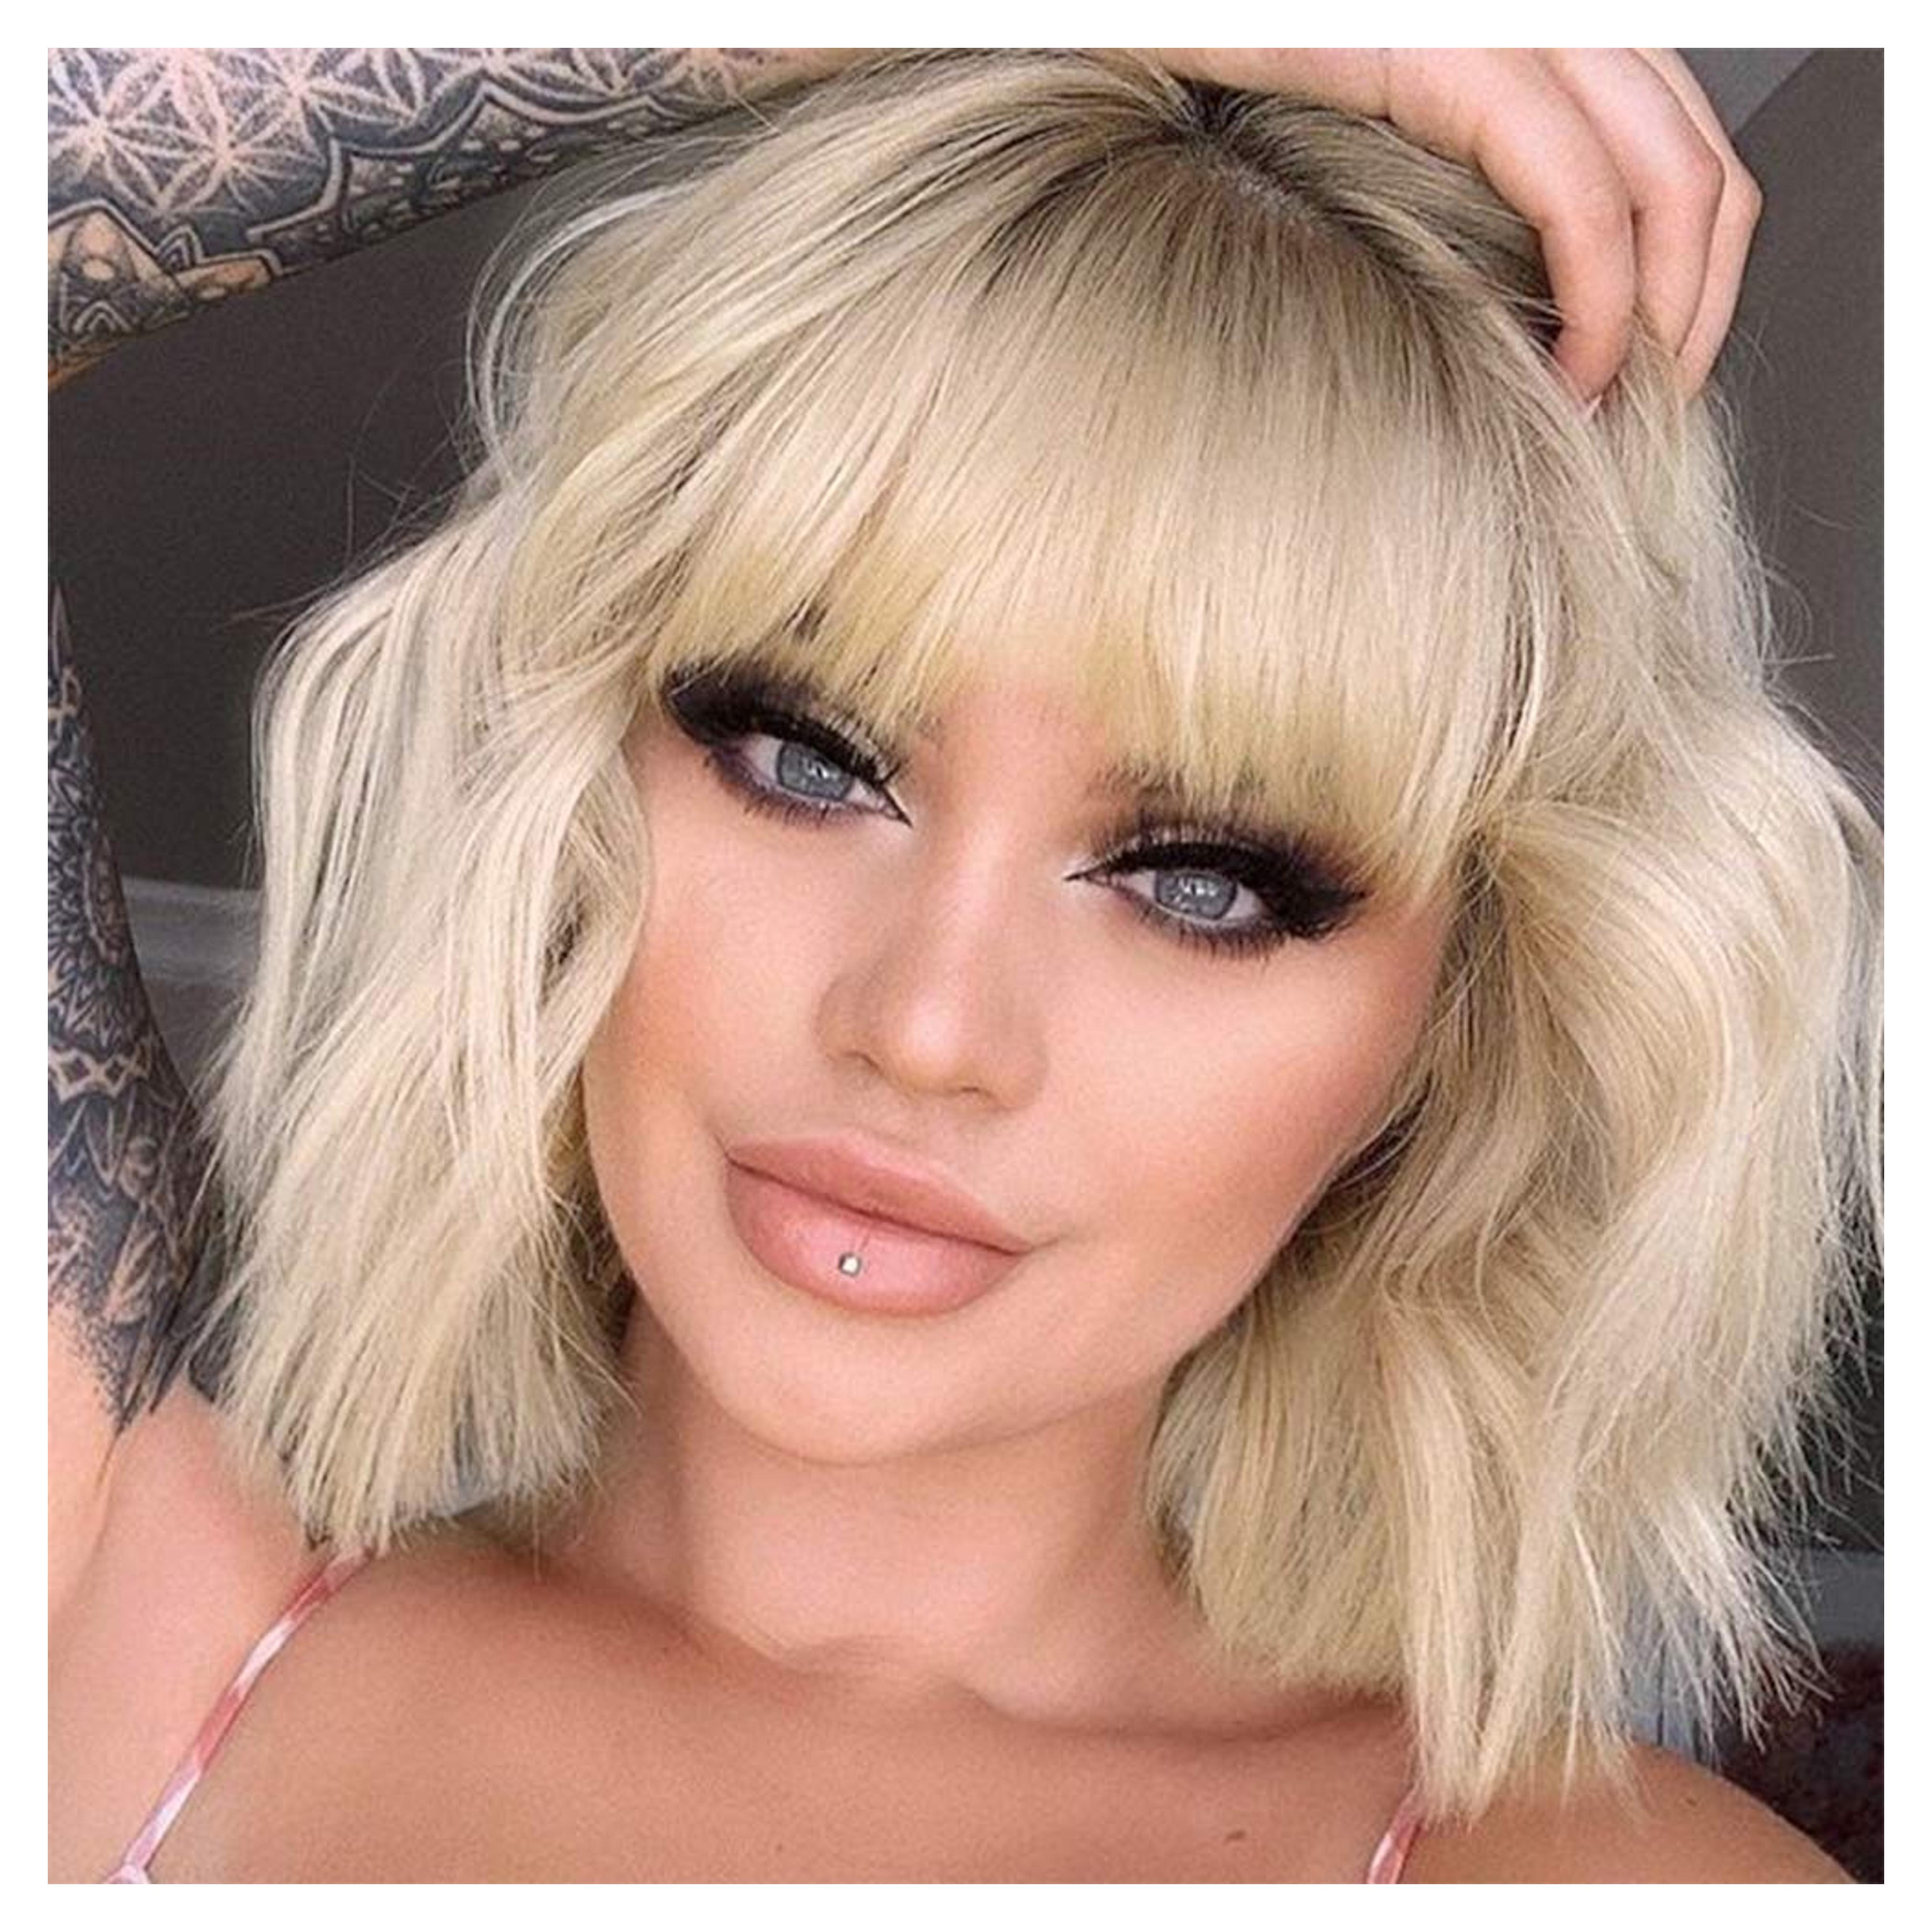 Amazon.com : MISSQUEEN Short Ombre Blonde Wigs Wavy Bob Wig with Air Bangs Women's Synthetic Curly Pastel Bob Wig for Girl Colorful Cosplay Wigs : Beauty & Personal Care